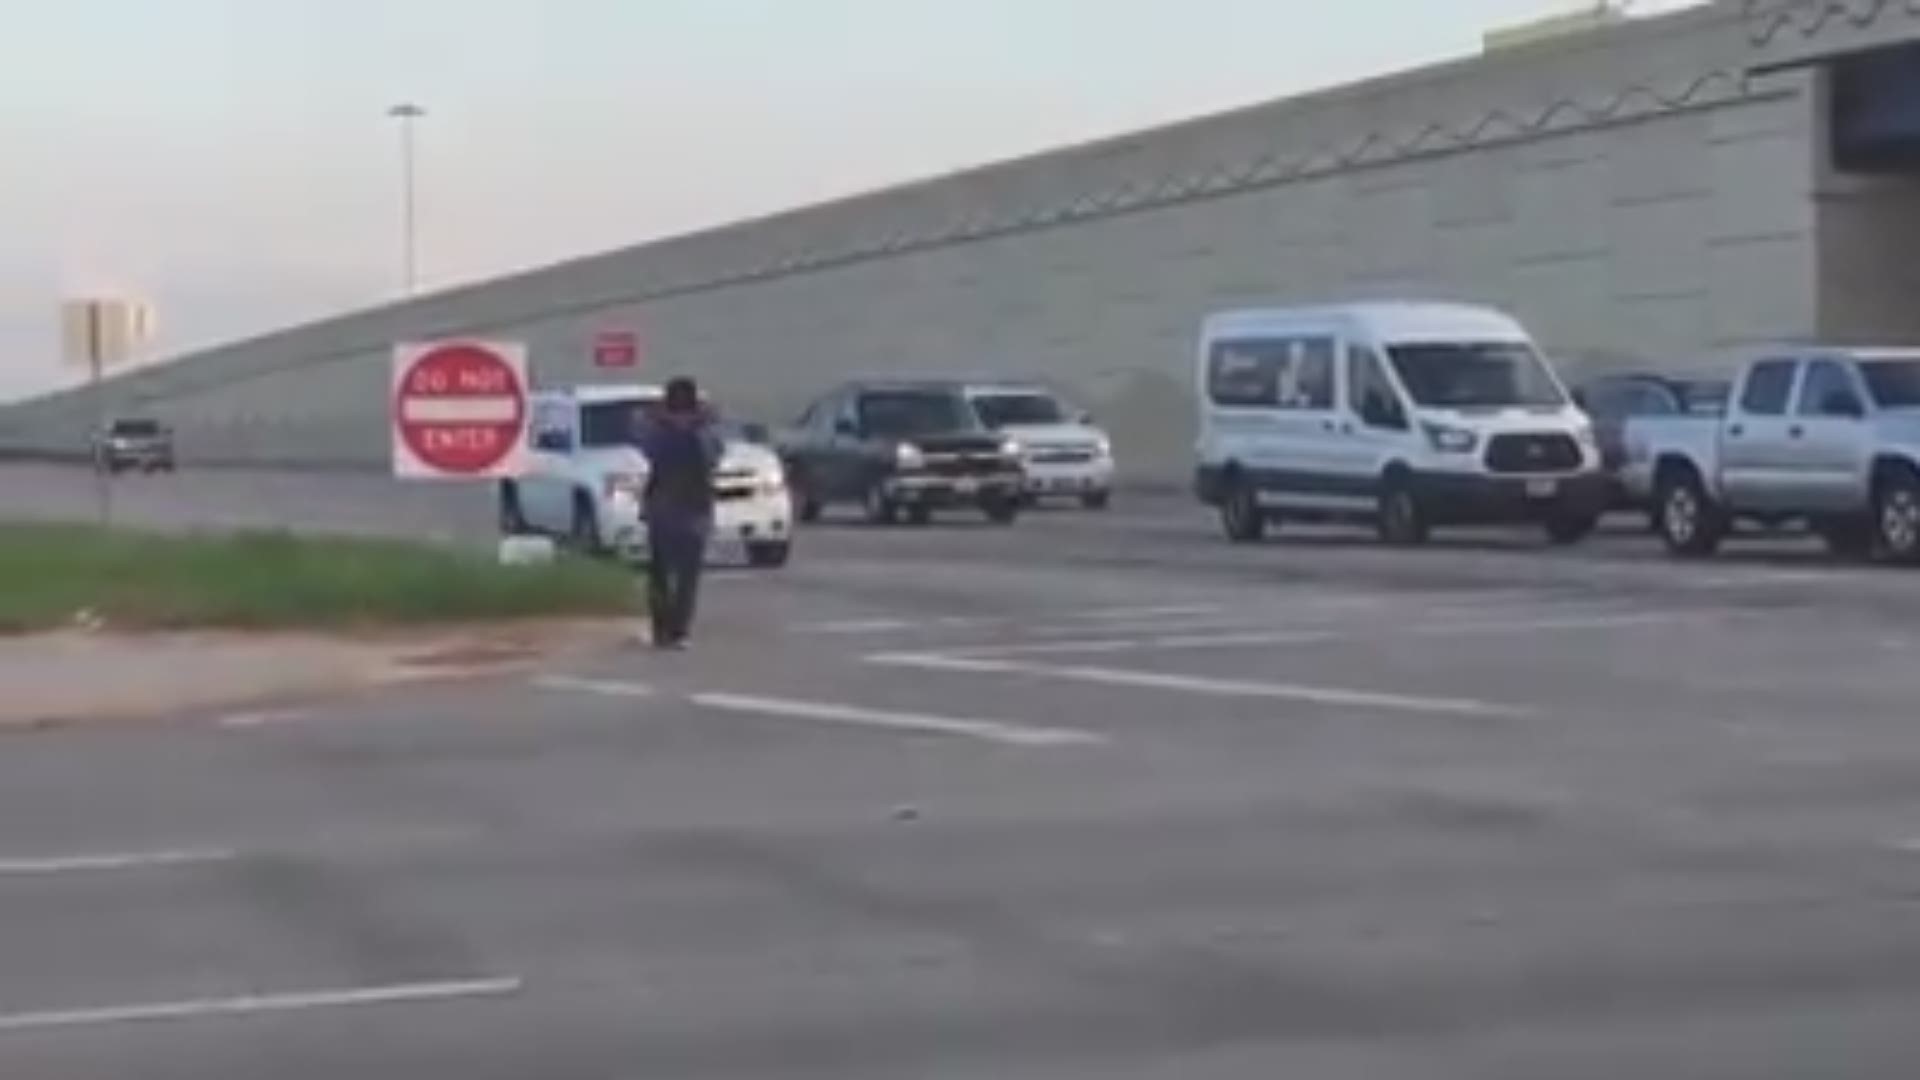 His name is Luz Garcia, and his panhandling ploy is used to con drivers, authorities say. (Video: Harris County Precinct 8 Constable's Office)